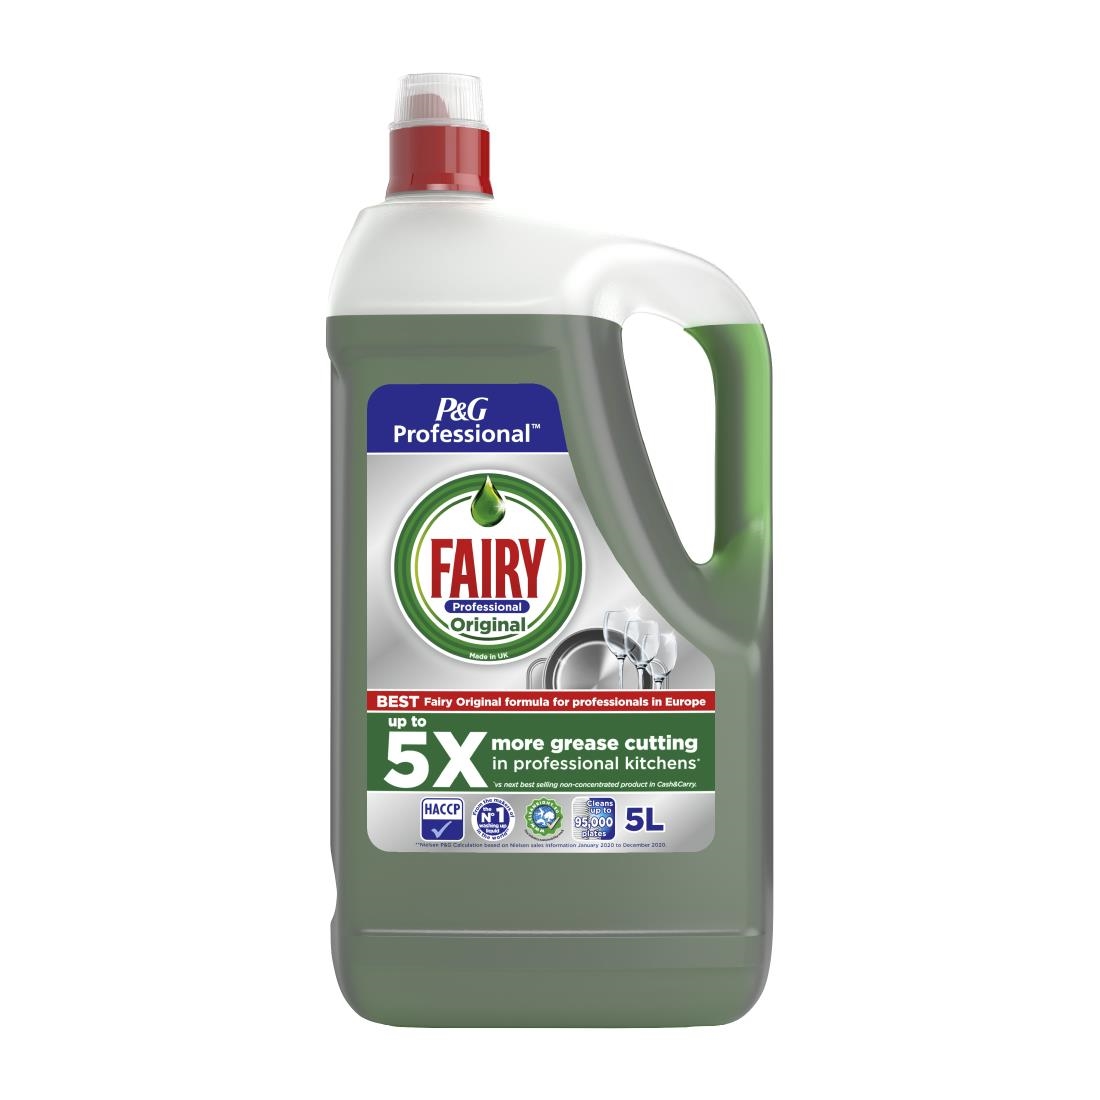 Fairy Professional Washing Up Liquid Original 5Ltr Pack of 2 (DX555)